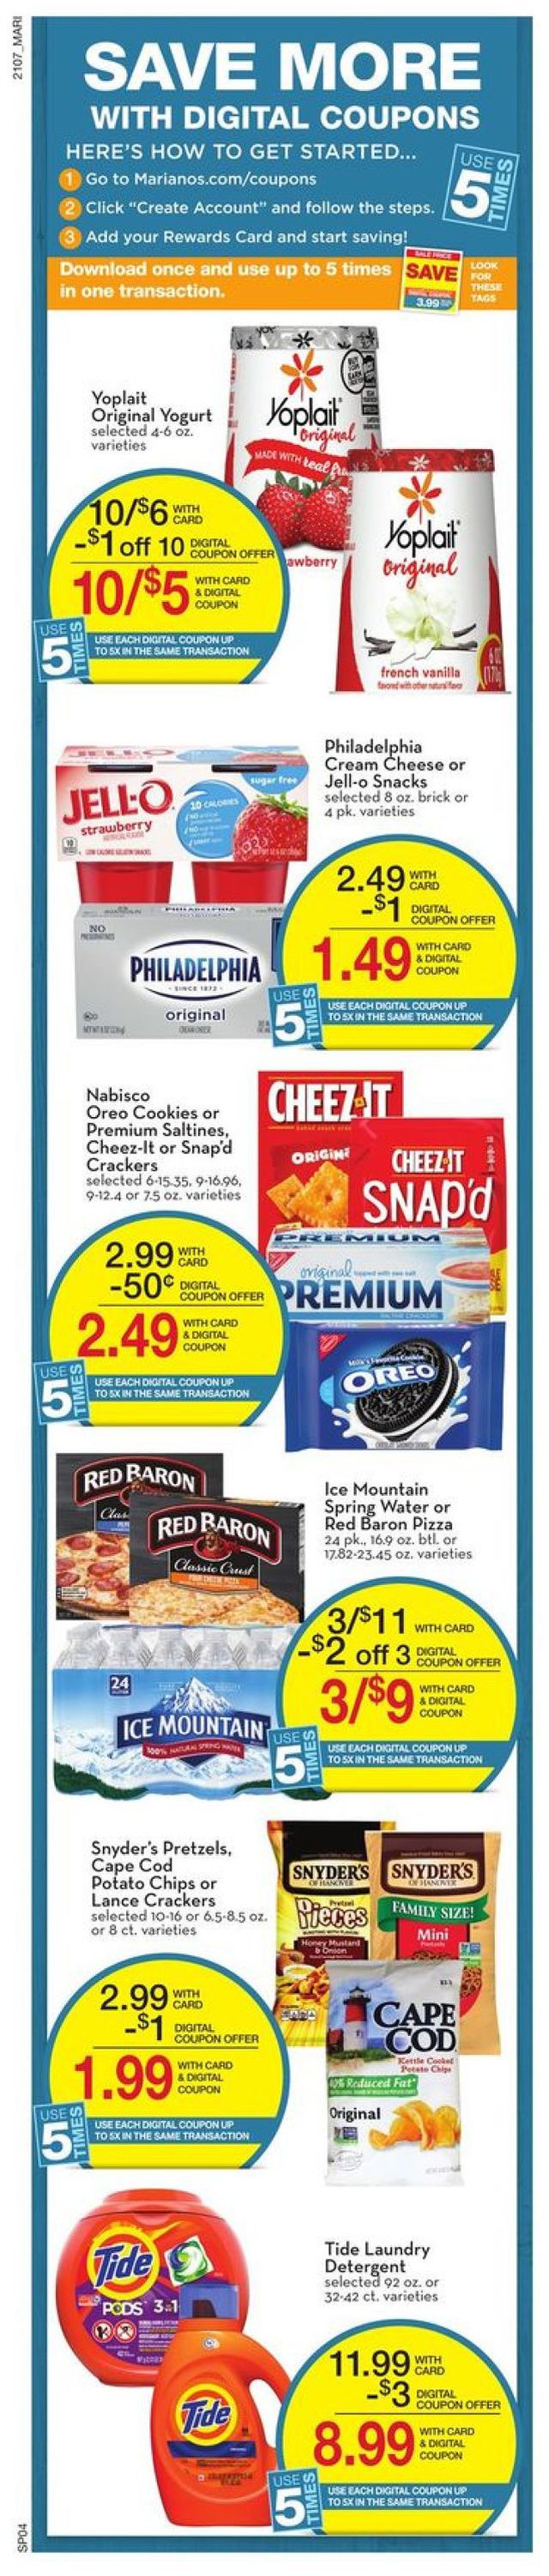 Mariano’s Ad from 03/17/2021